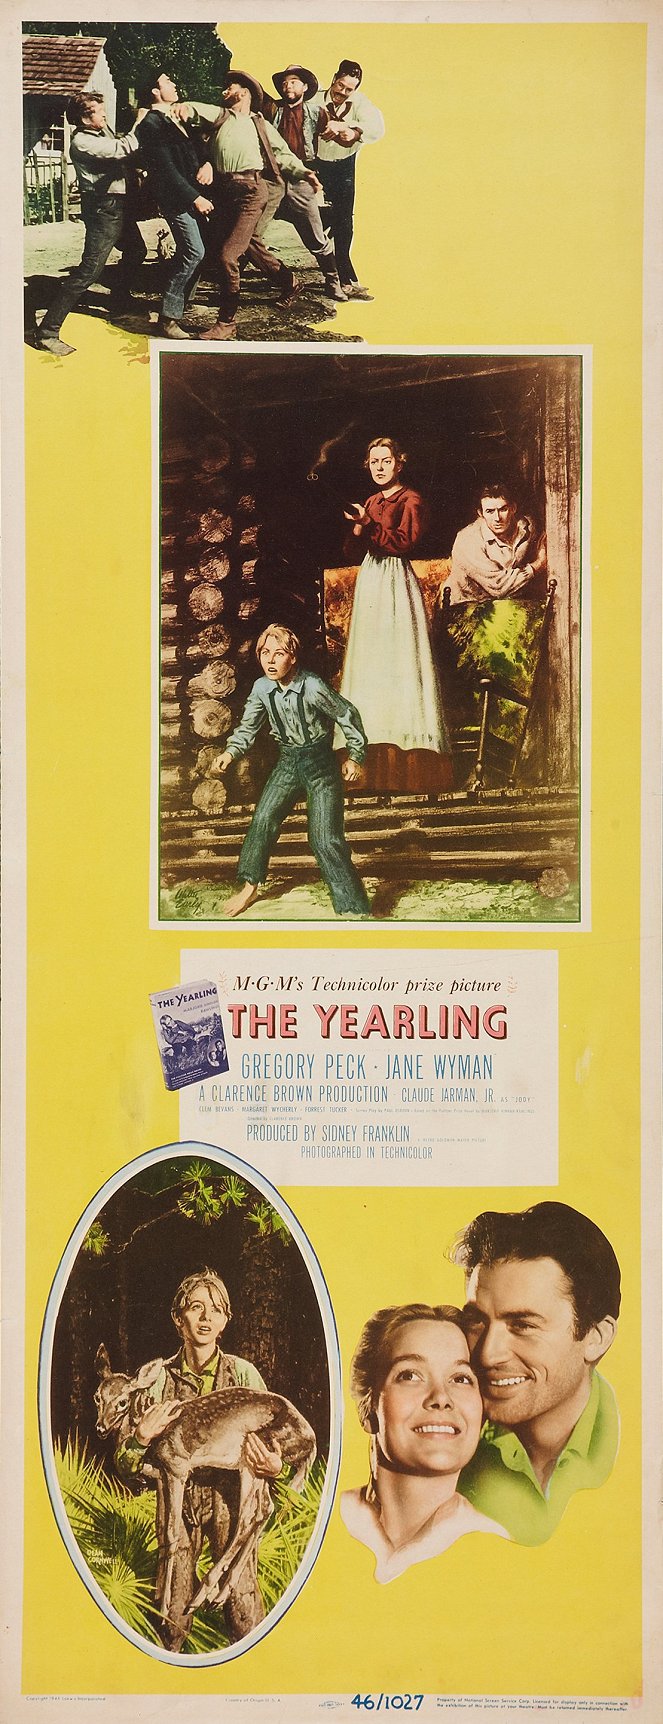 The Yearling - Posters